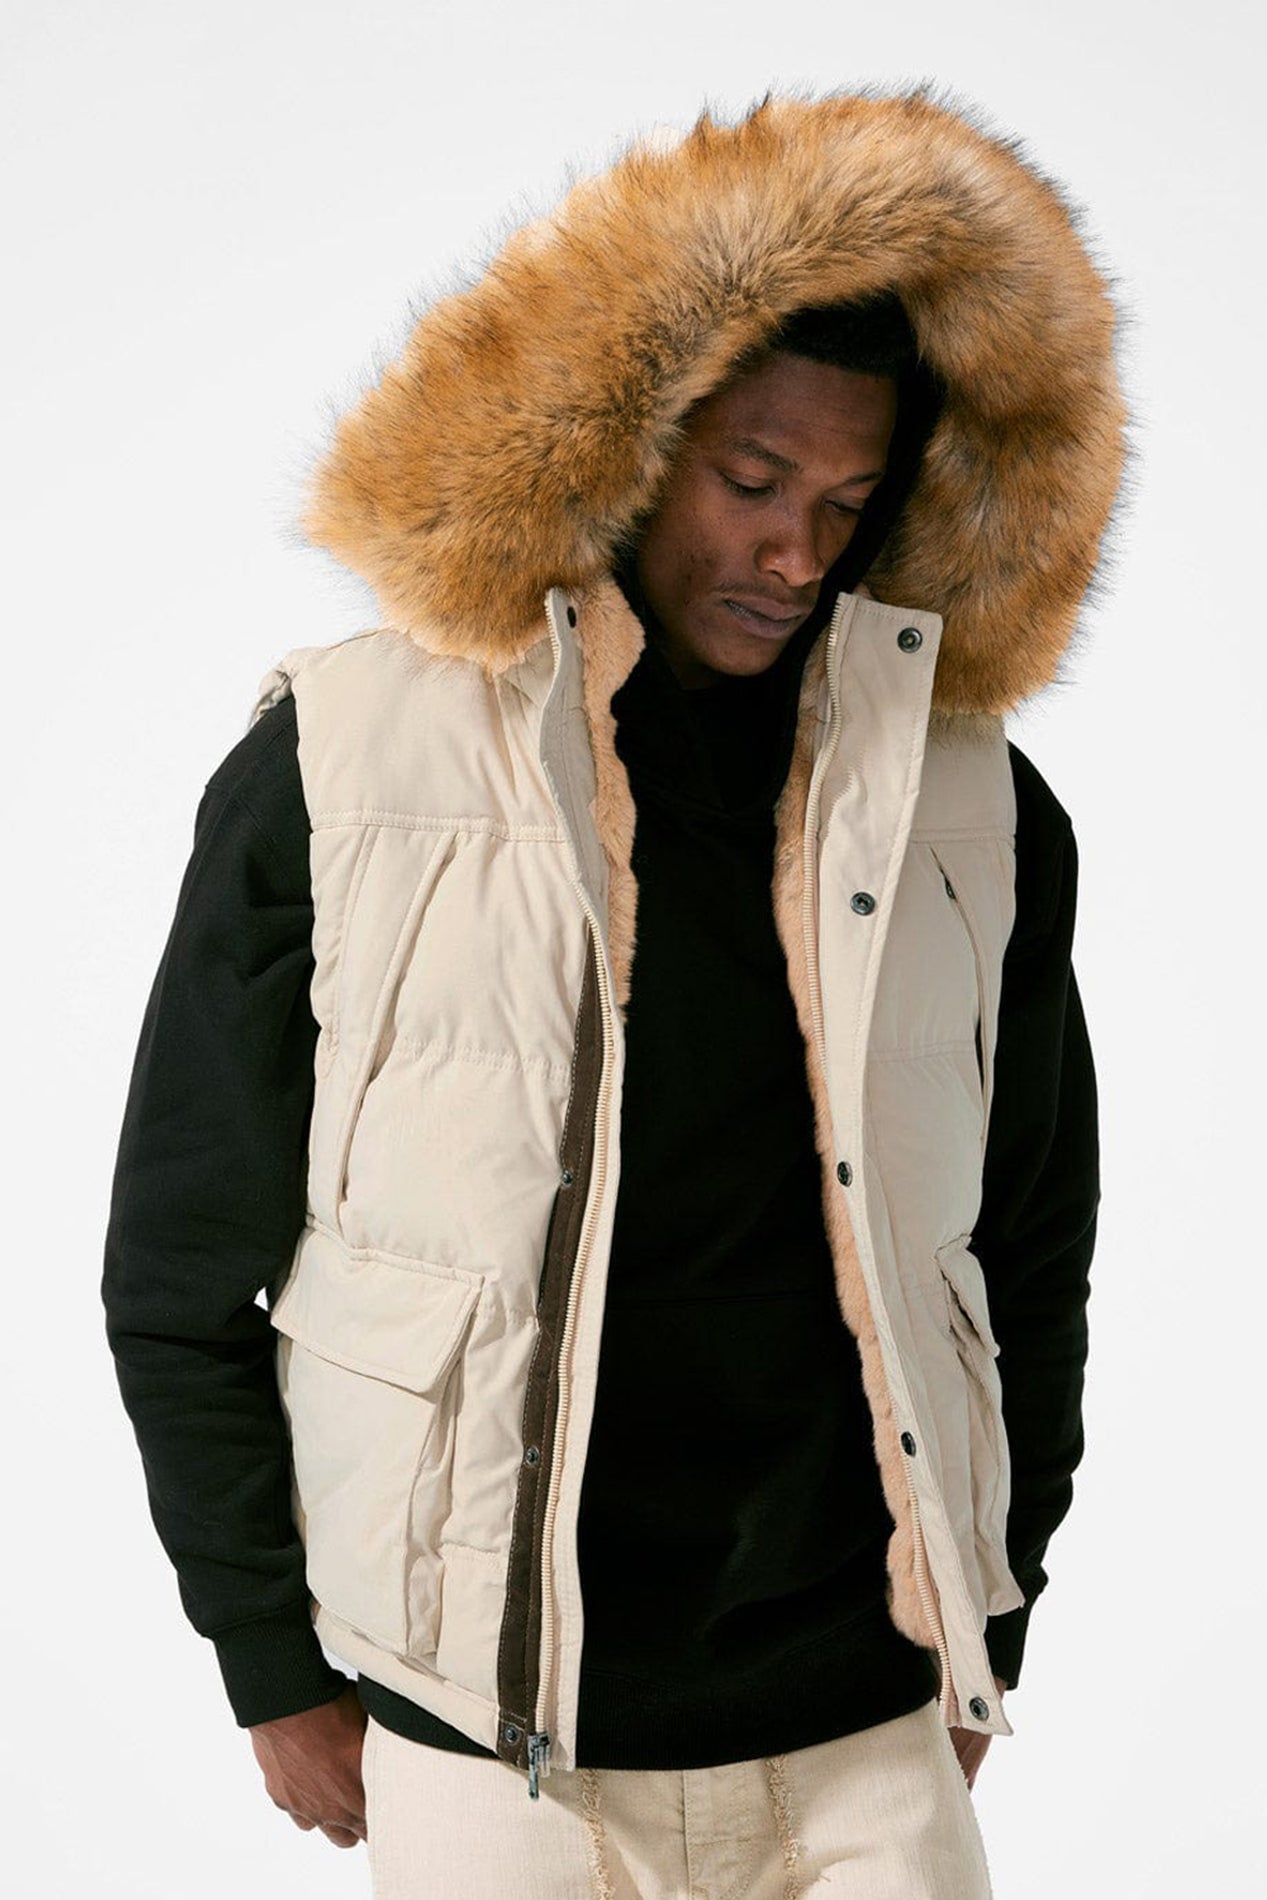 Khaki Faux fur-lined hooded jacket made of a water-resistant polyester shell featuring a removable hood with a removable faux fox fur trim. The hood and front of the jacket are lined with faux rabbit fur for superior warmth. The jacket has JC branded zippers throughout, dual pockets at the sides with button openings, and a full zipper front opening. Faux suede taping adorns the front zipper.